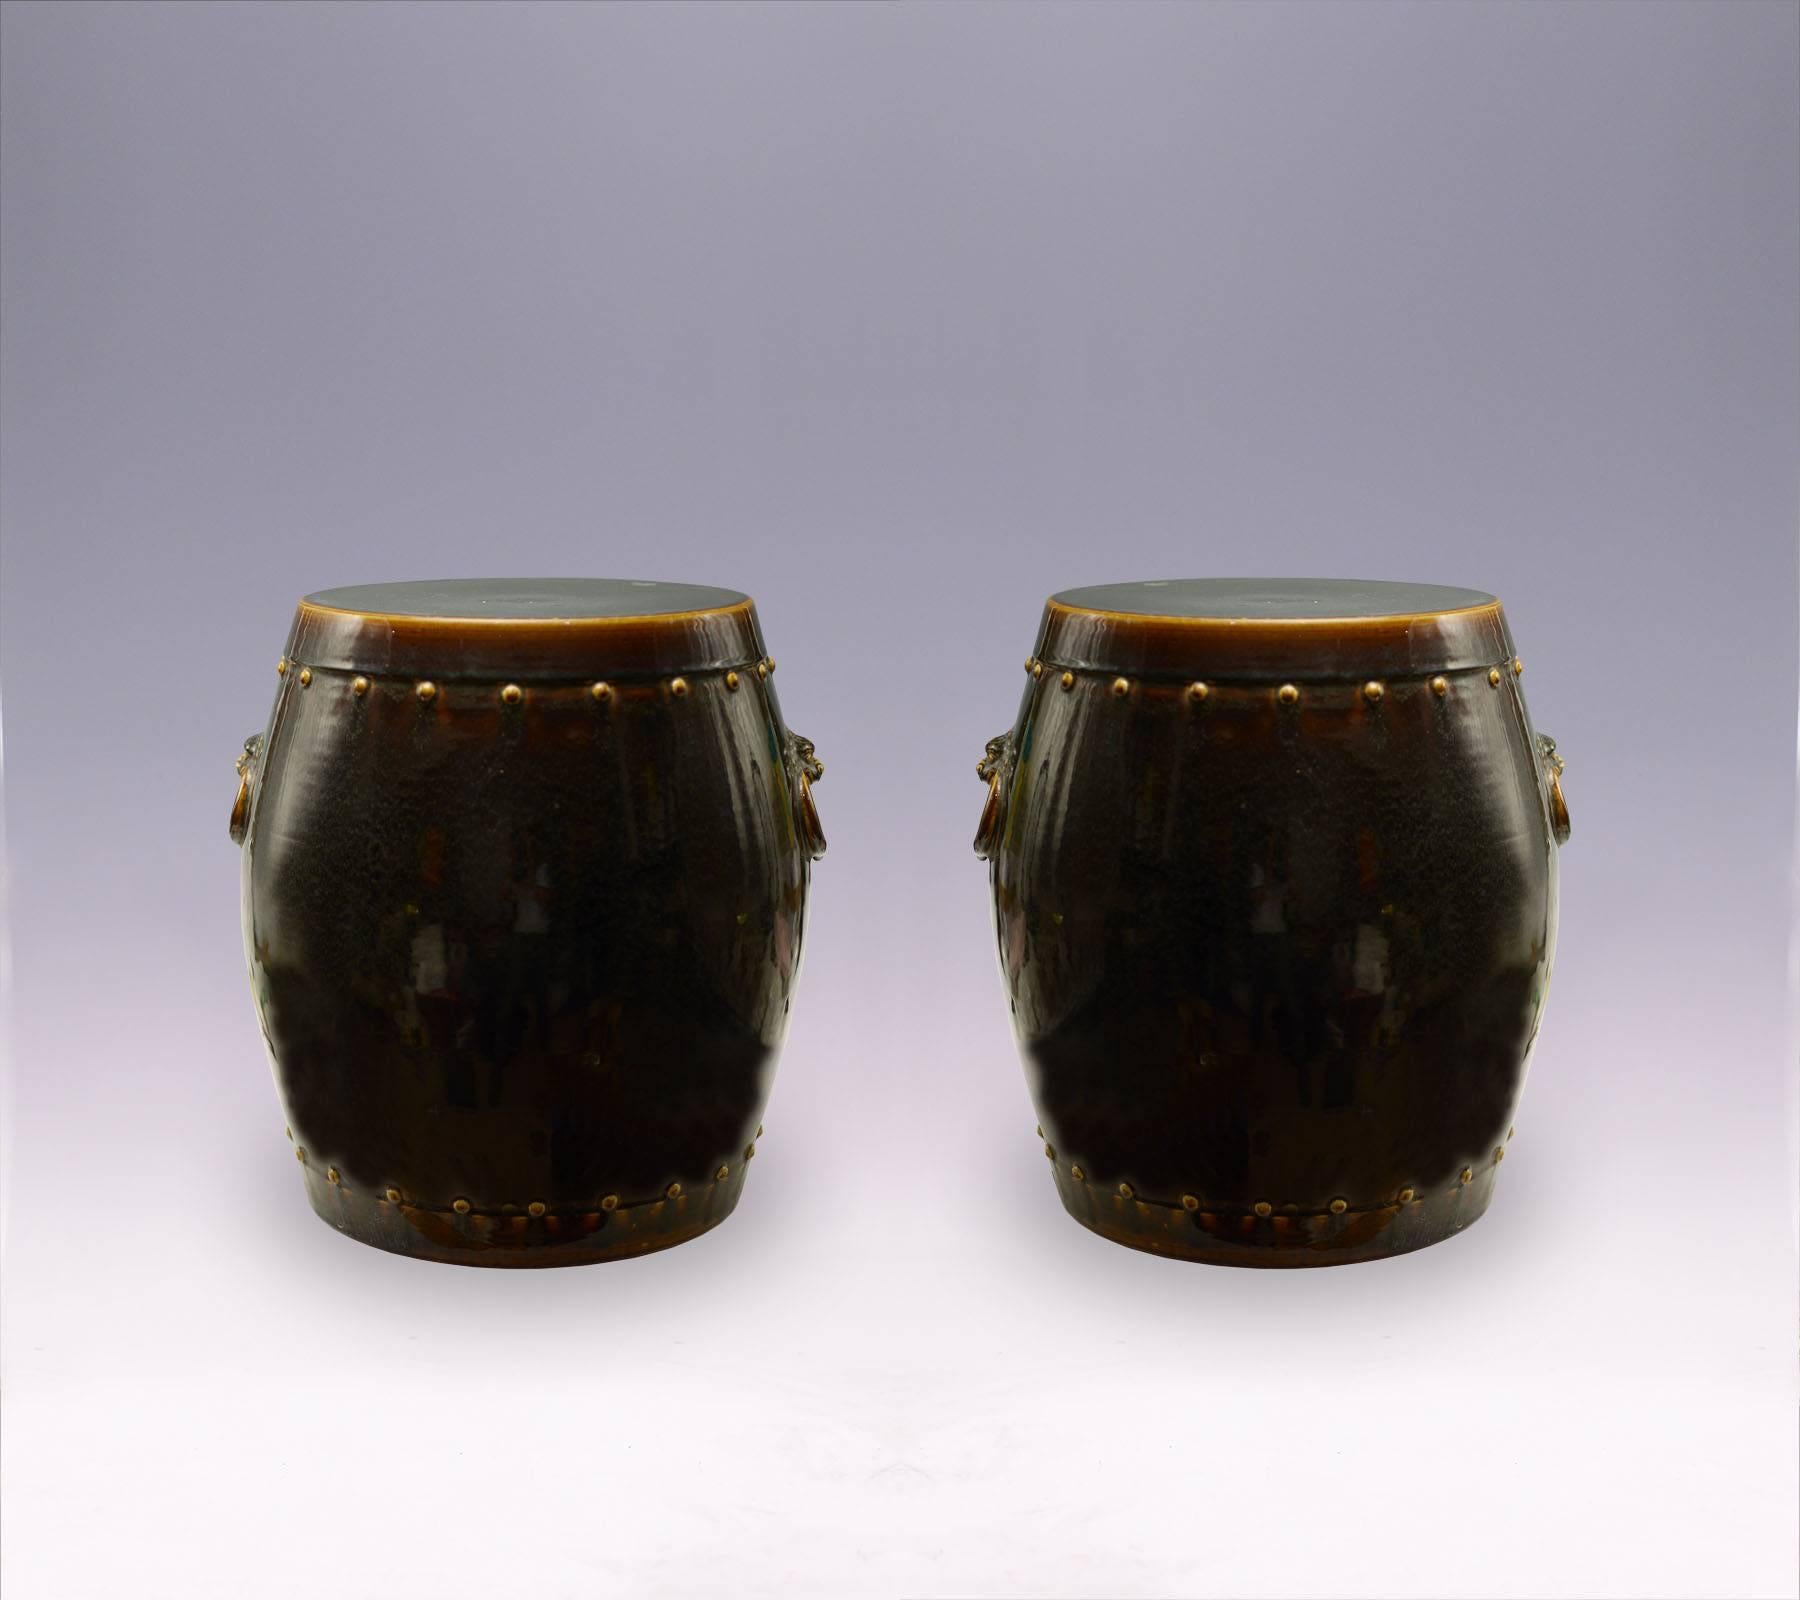 A pair of brown porcelain stools in a simple oval form body that fading from light to dark in a glaze surface. The design on the top and base each merged with a circular yellowish ring. circa 1920.
